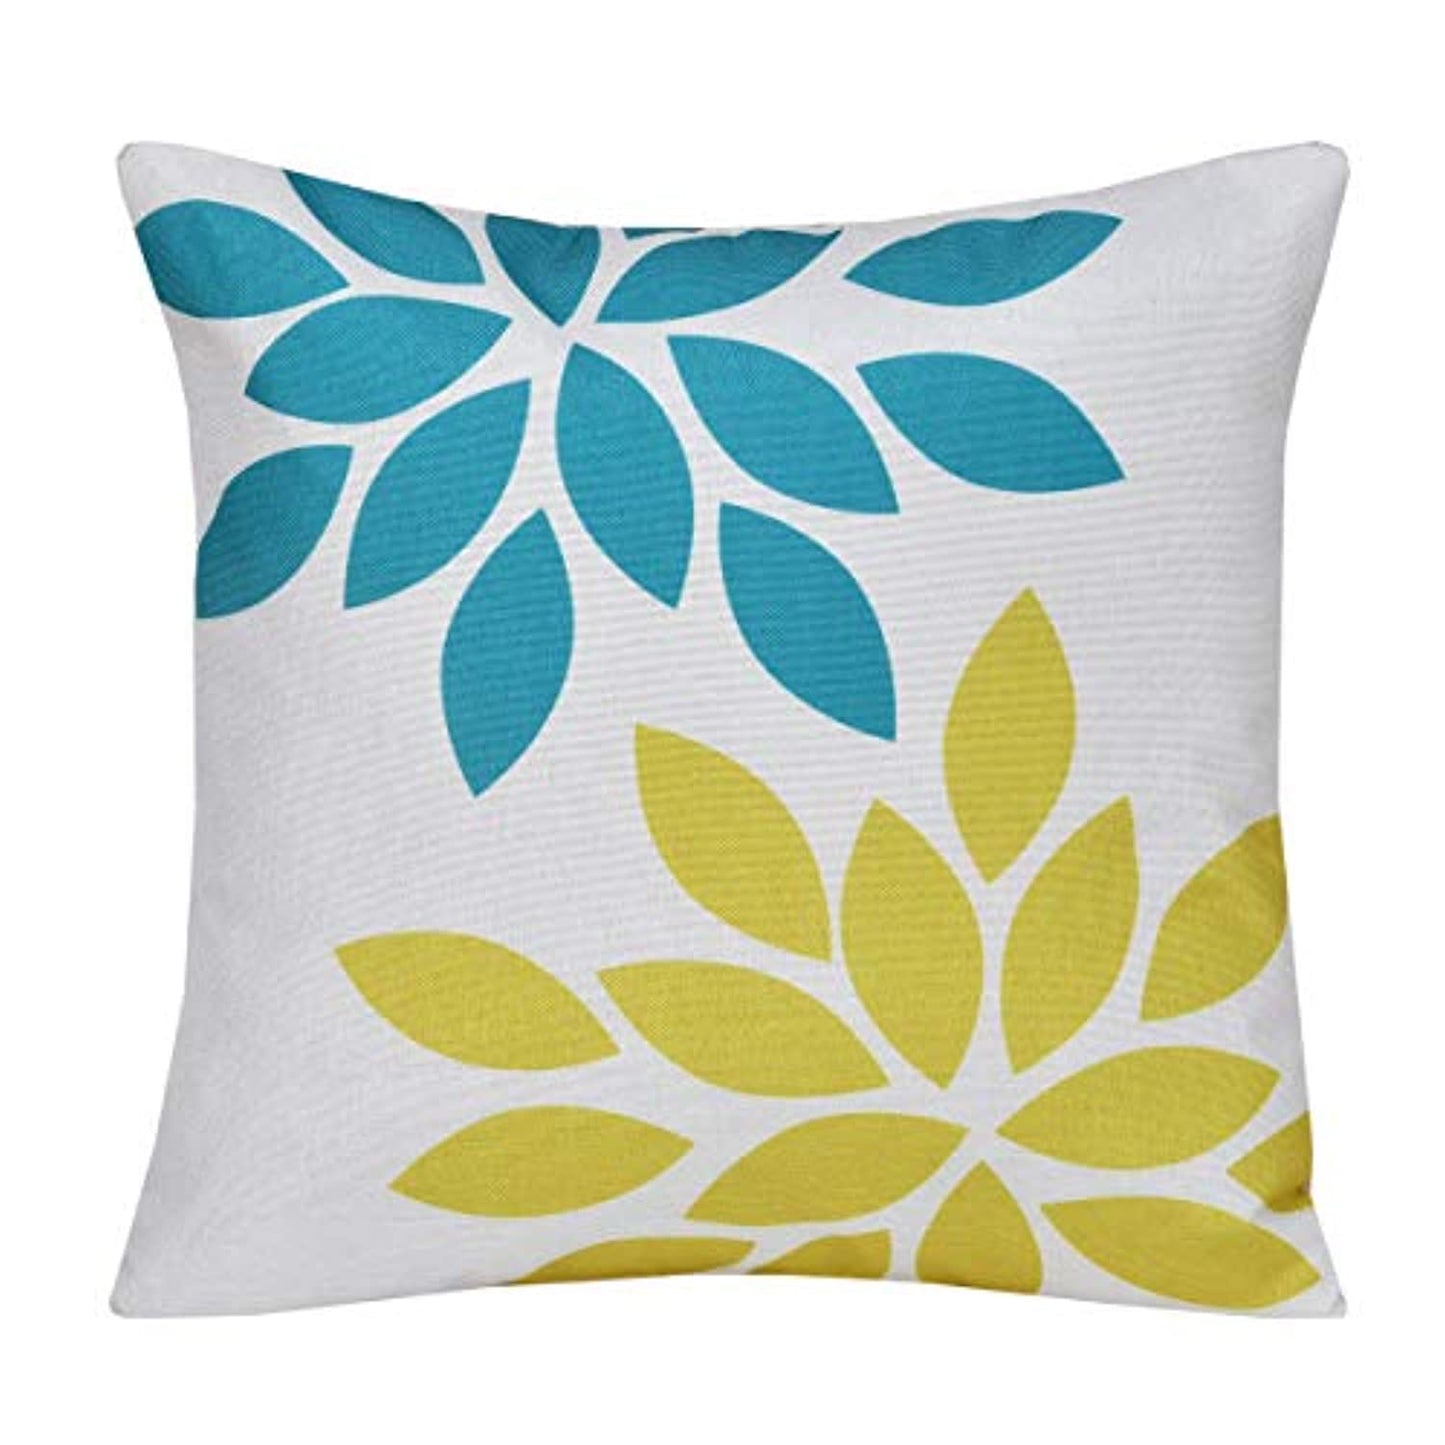 Leaf Printed Jute Cushion Cover (16 X 16-inches, Multicolour) - Set of 5